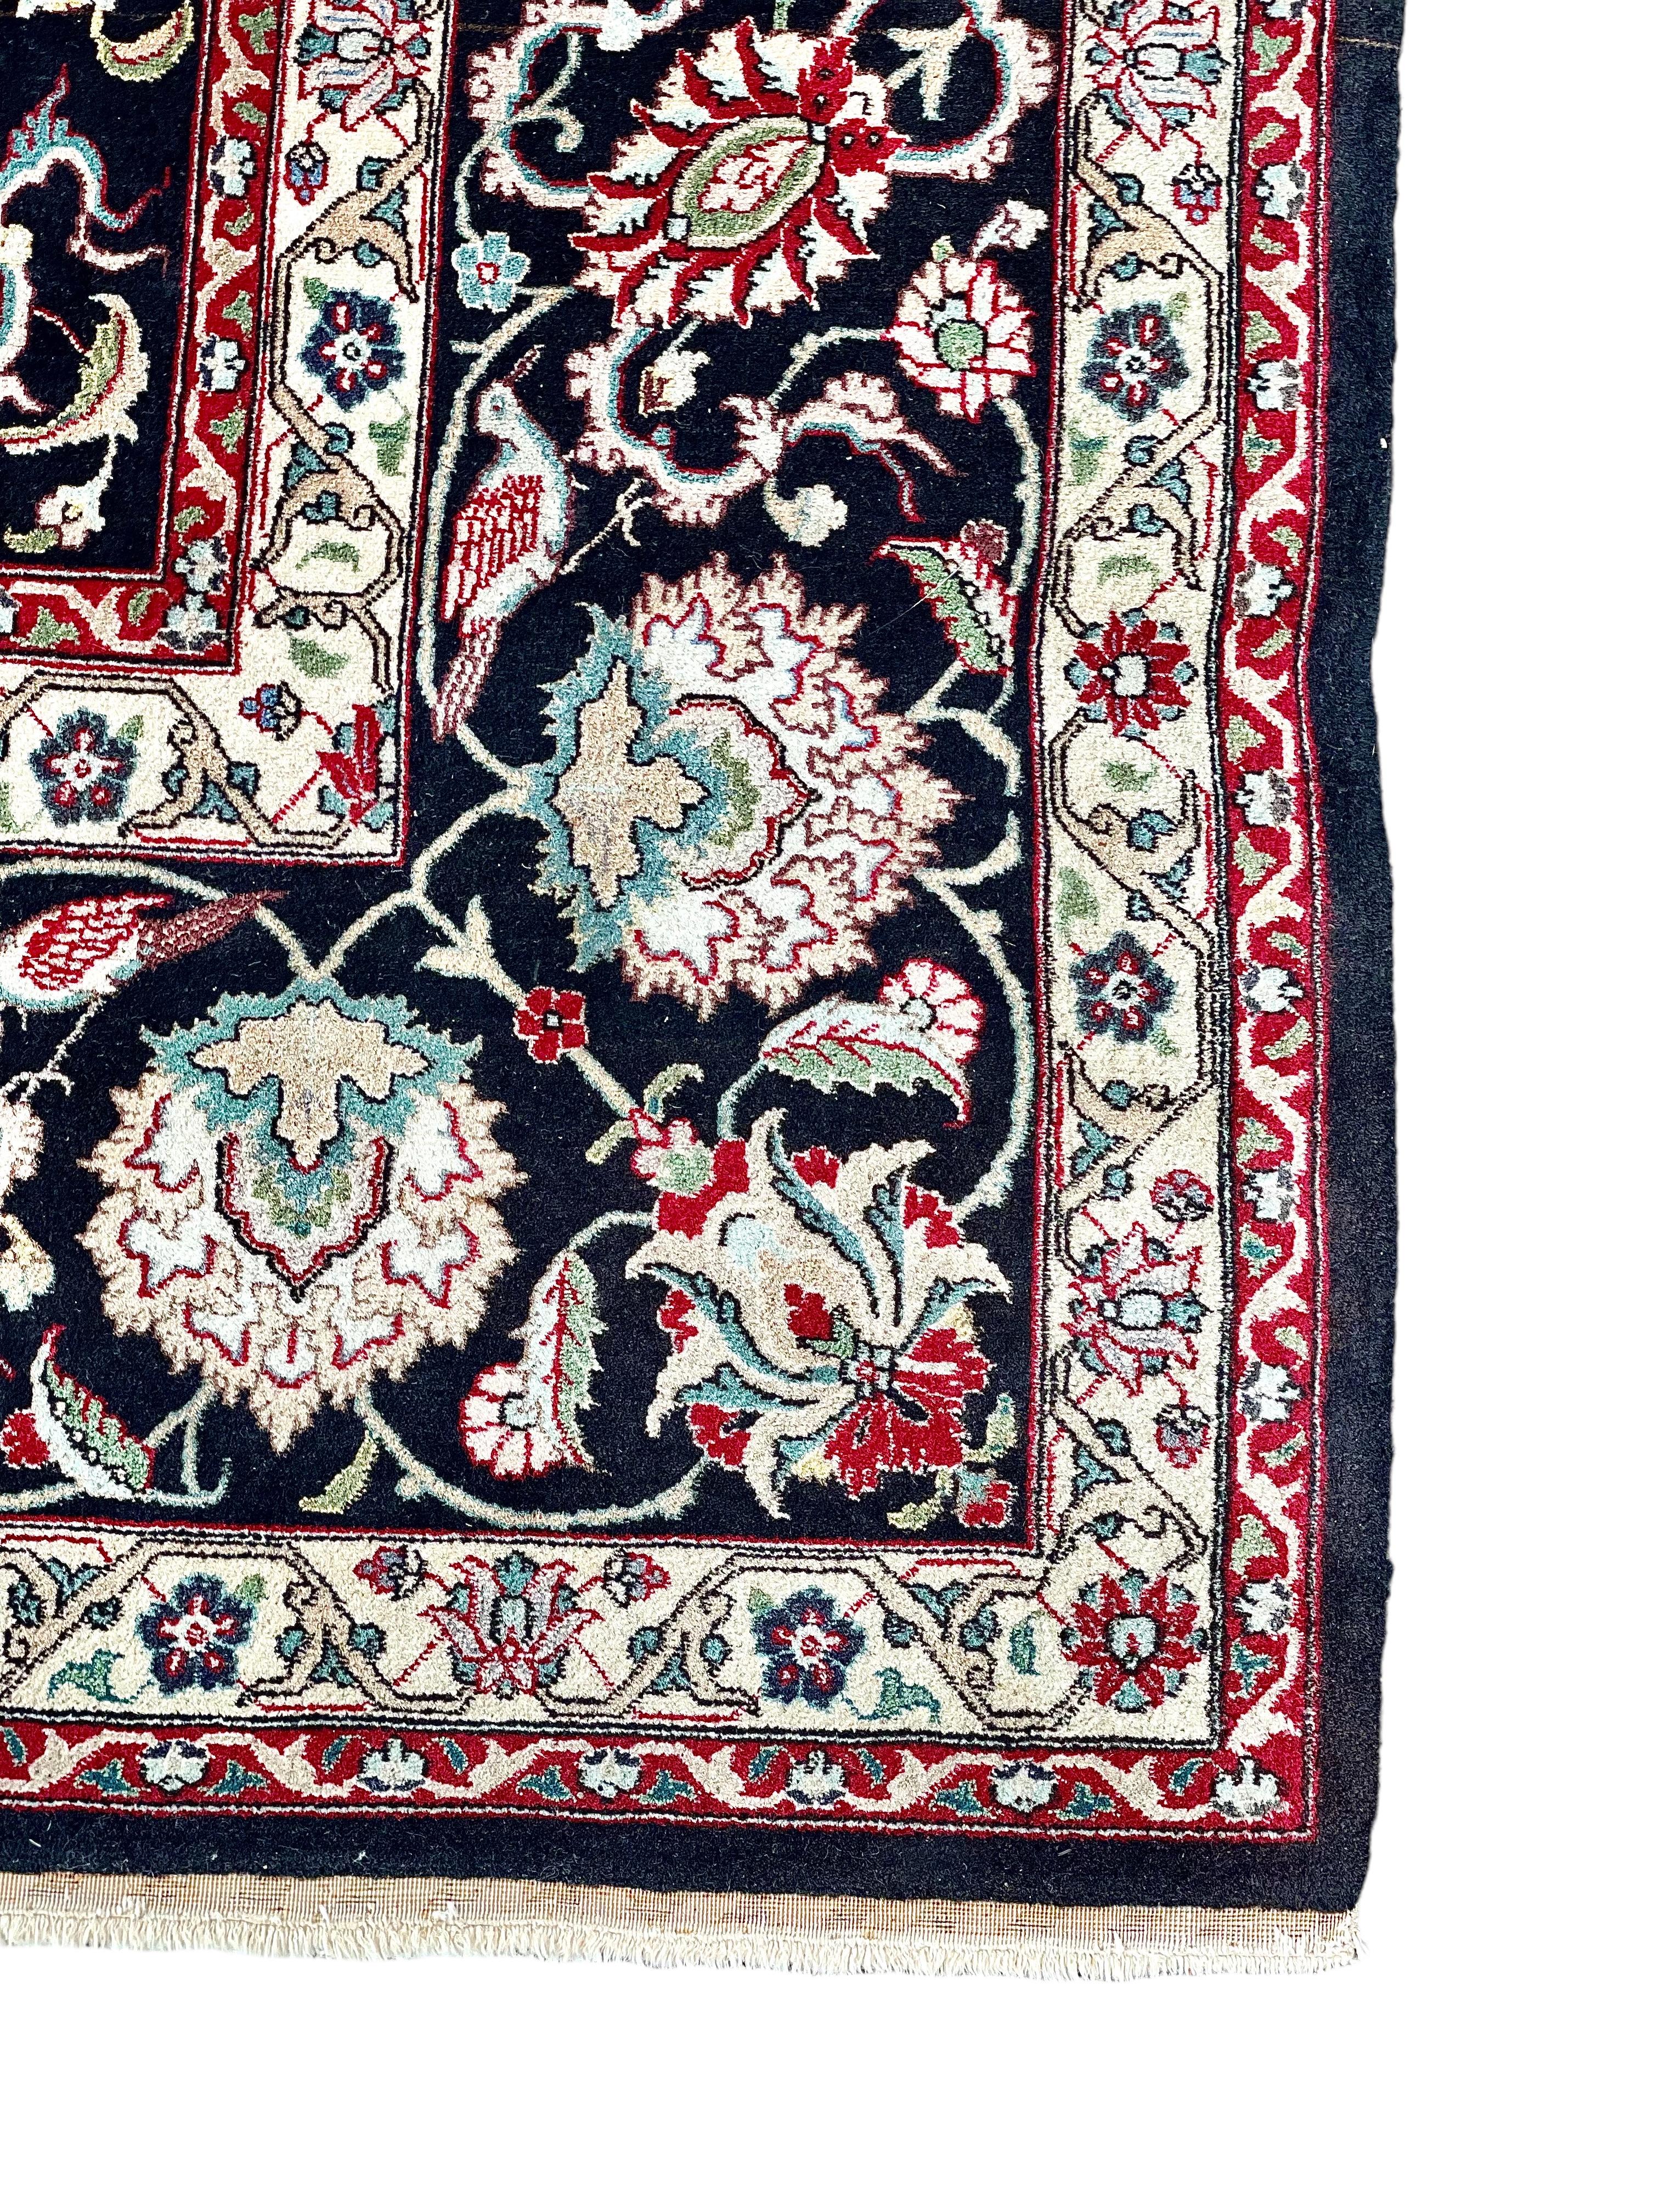 20th Century Large Tabriz Persian Rug in a Black Background For Sale 4